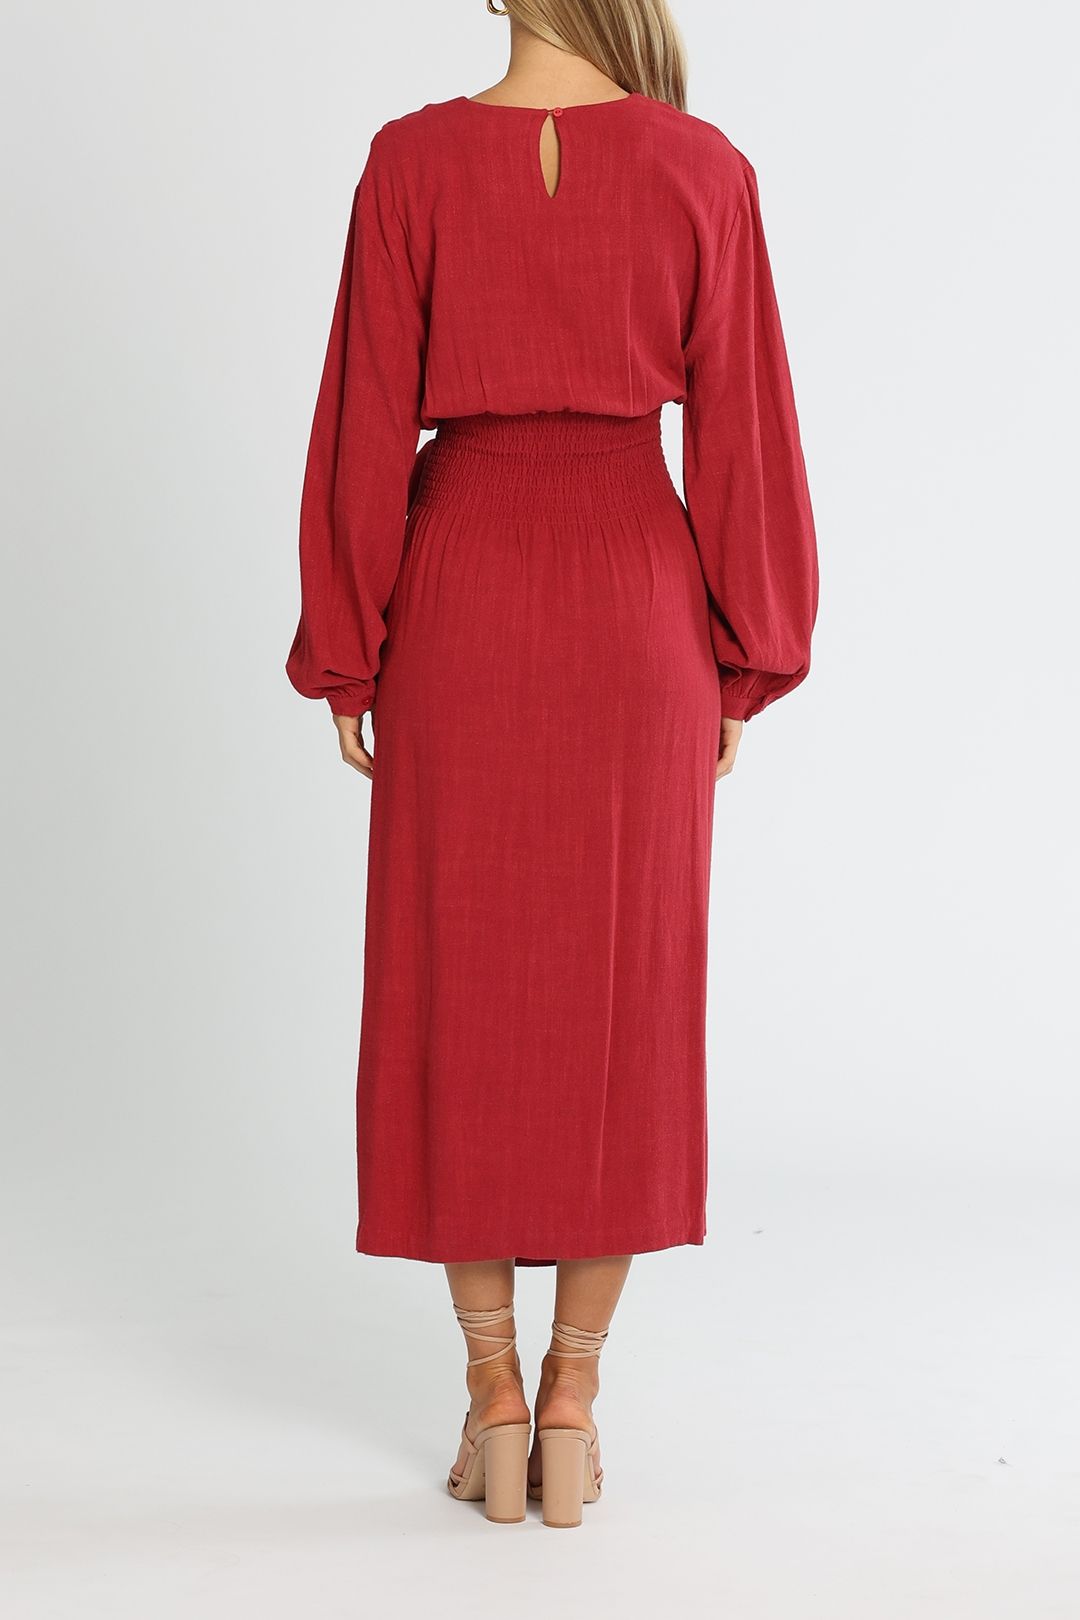 Brave and True Turning Point Dress Berry Linen Viscose Midi